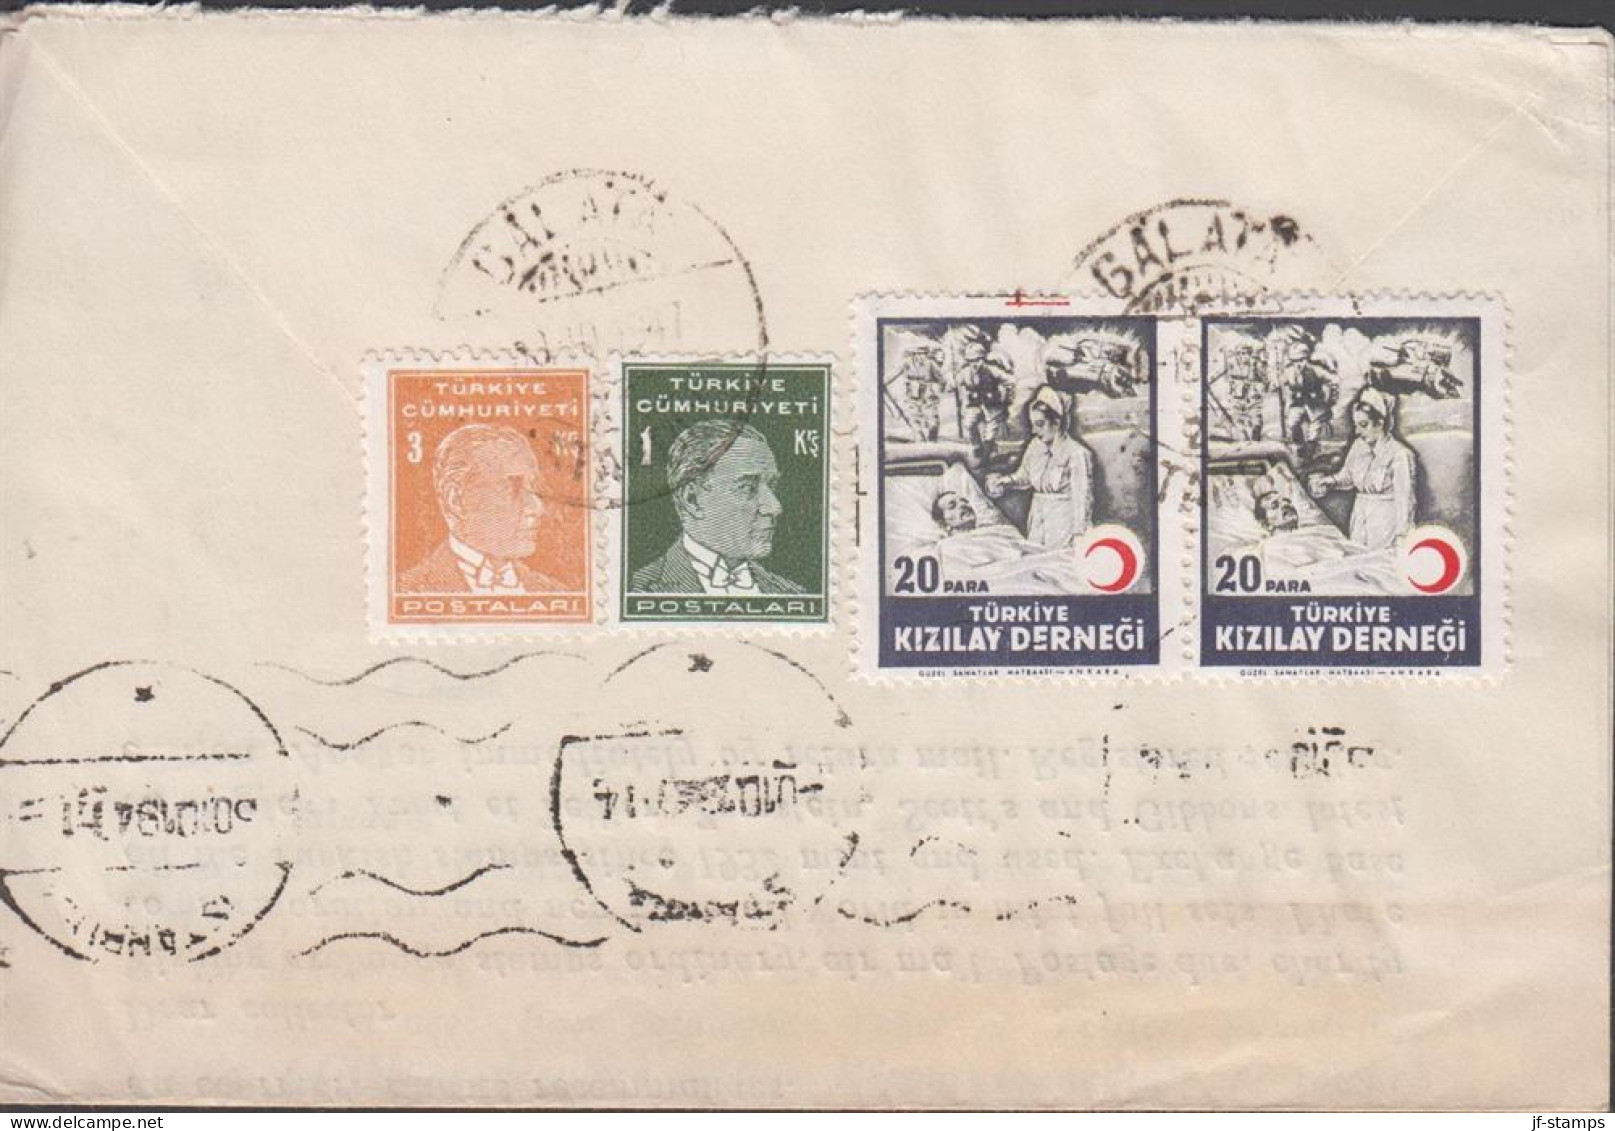 1947. TÜRKIYE. Cover To Sweden With 1 + 3 Krs Atatürk + Pair 20 PARA Charity Stamps Re... (Michel 1001+ C 93) - JF442679 - Unused Stamps